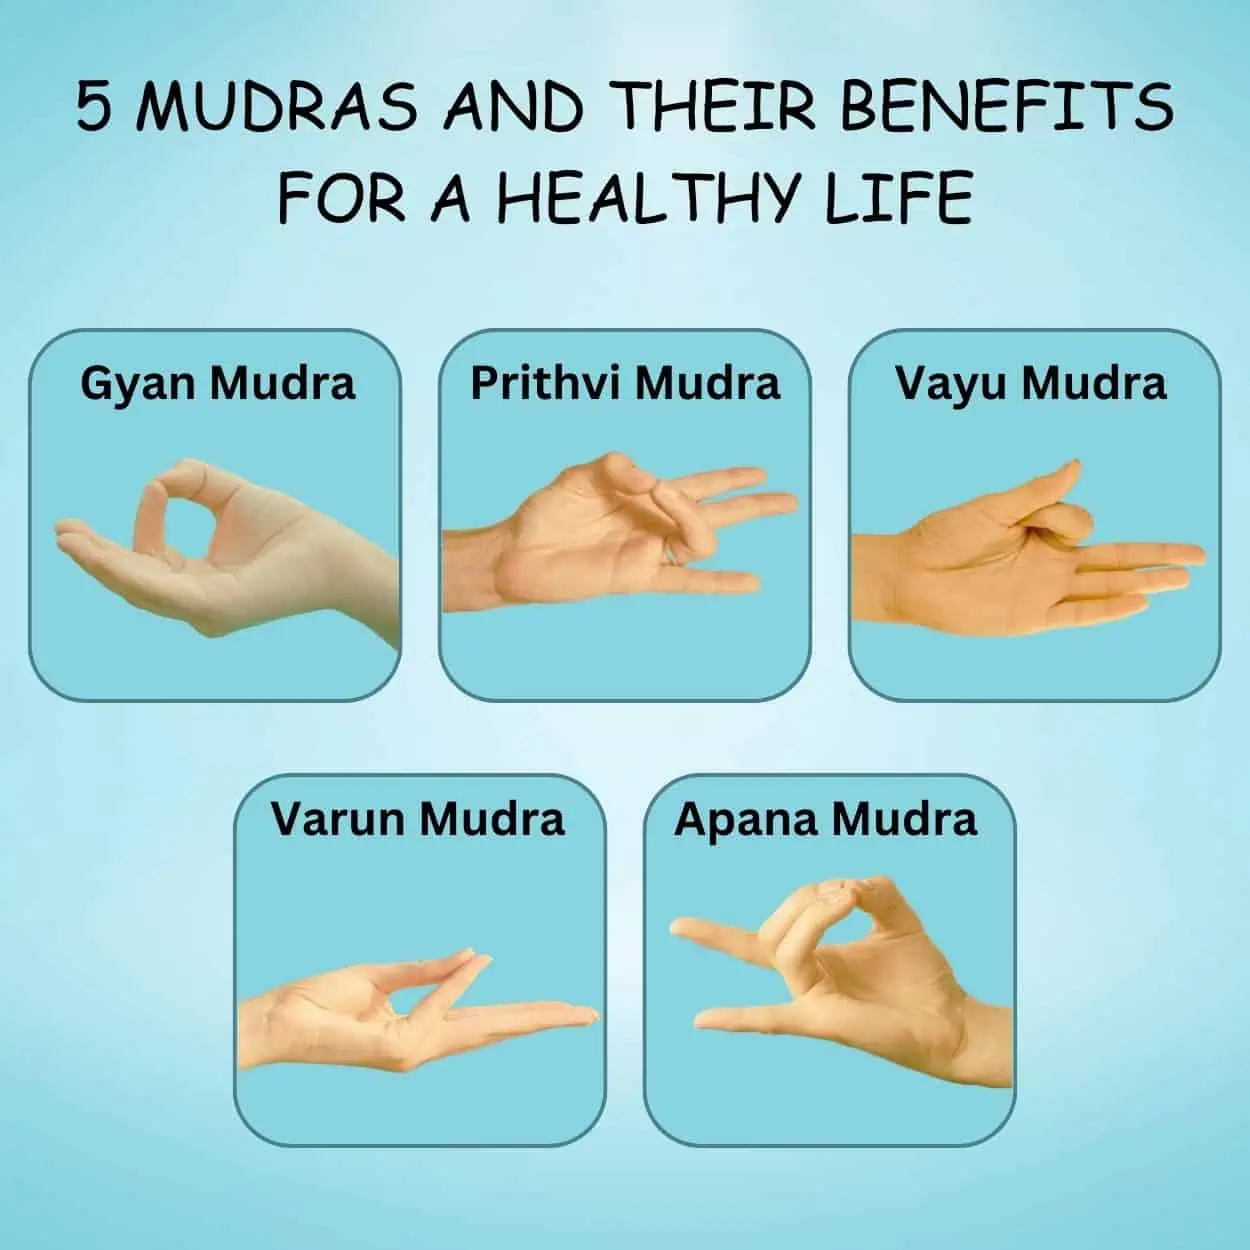 5 Mudras and Their Benefits for a Healthy Life